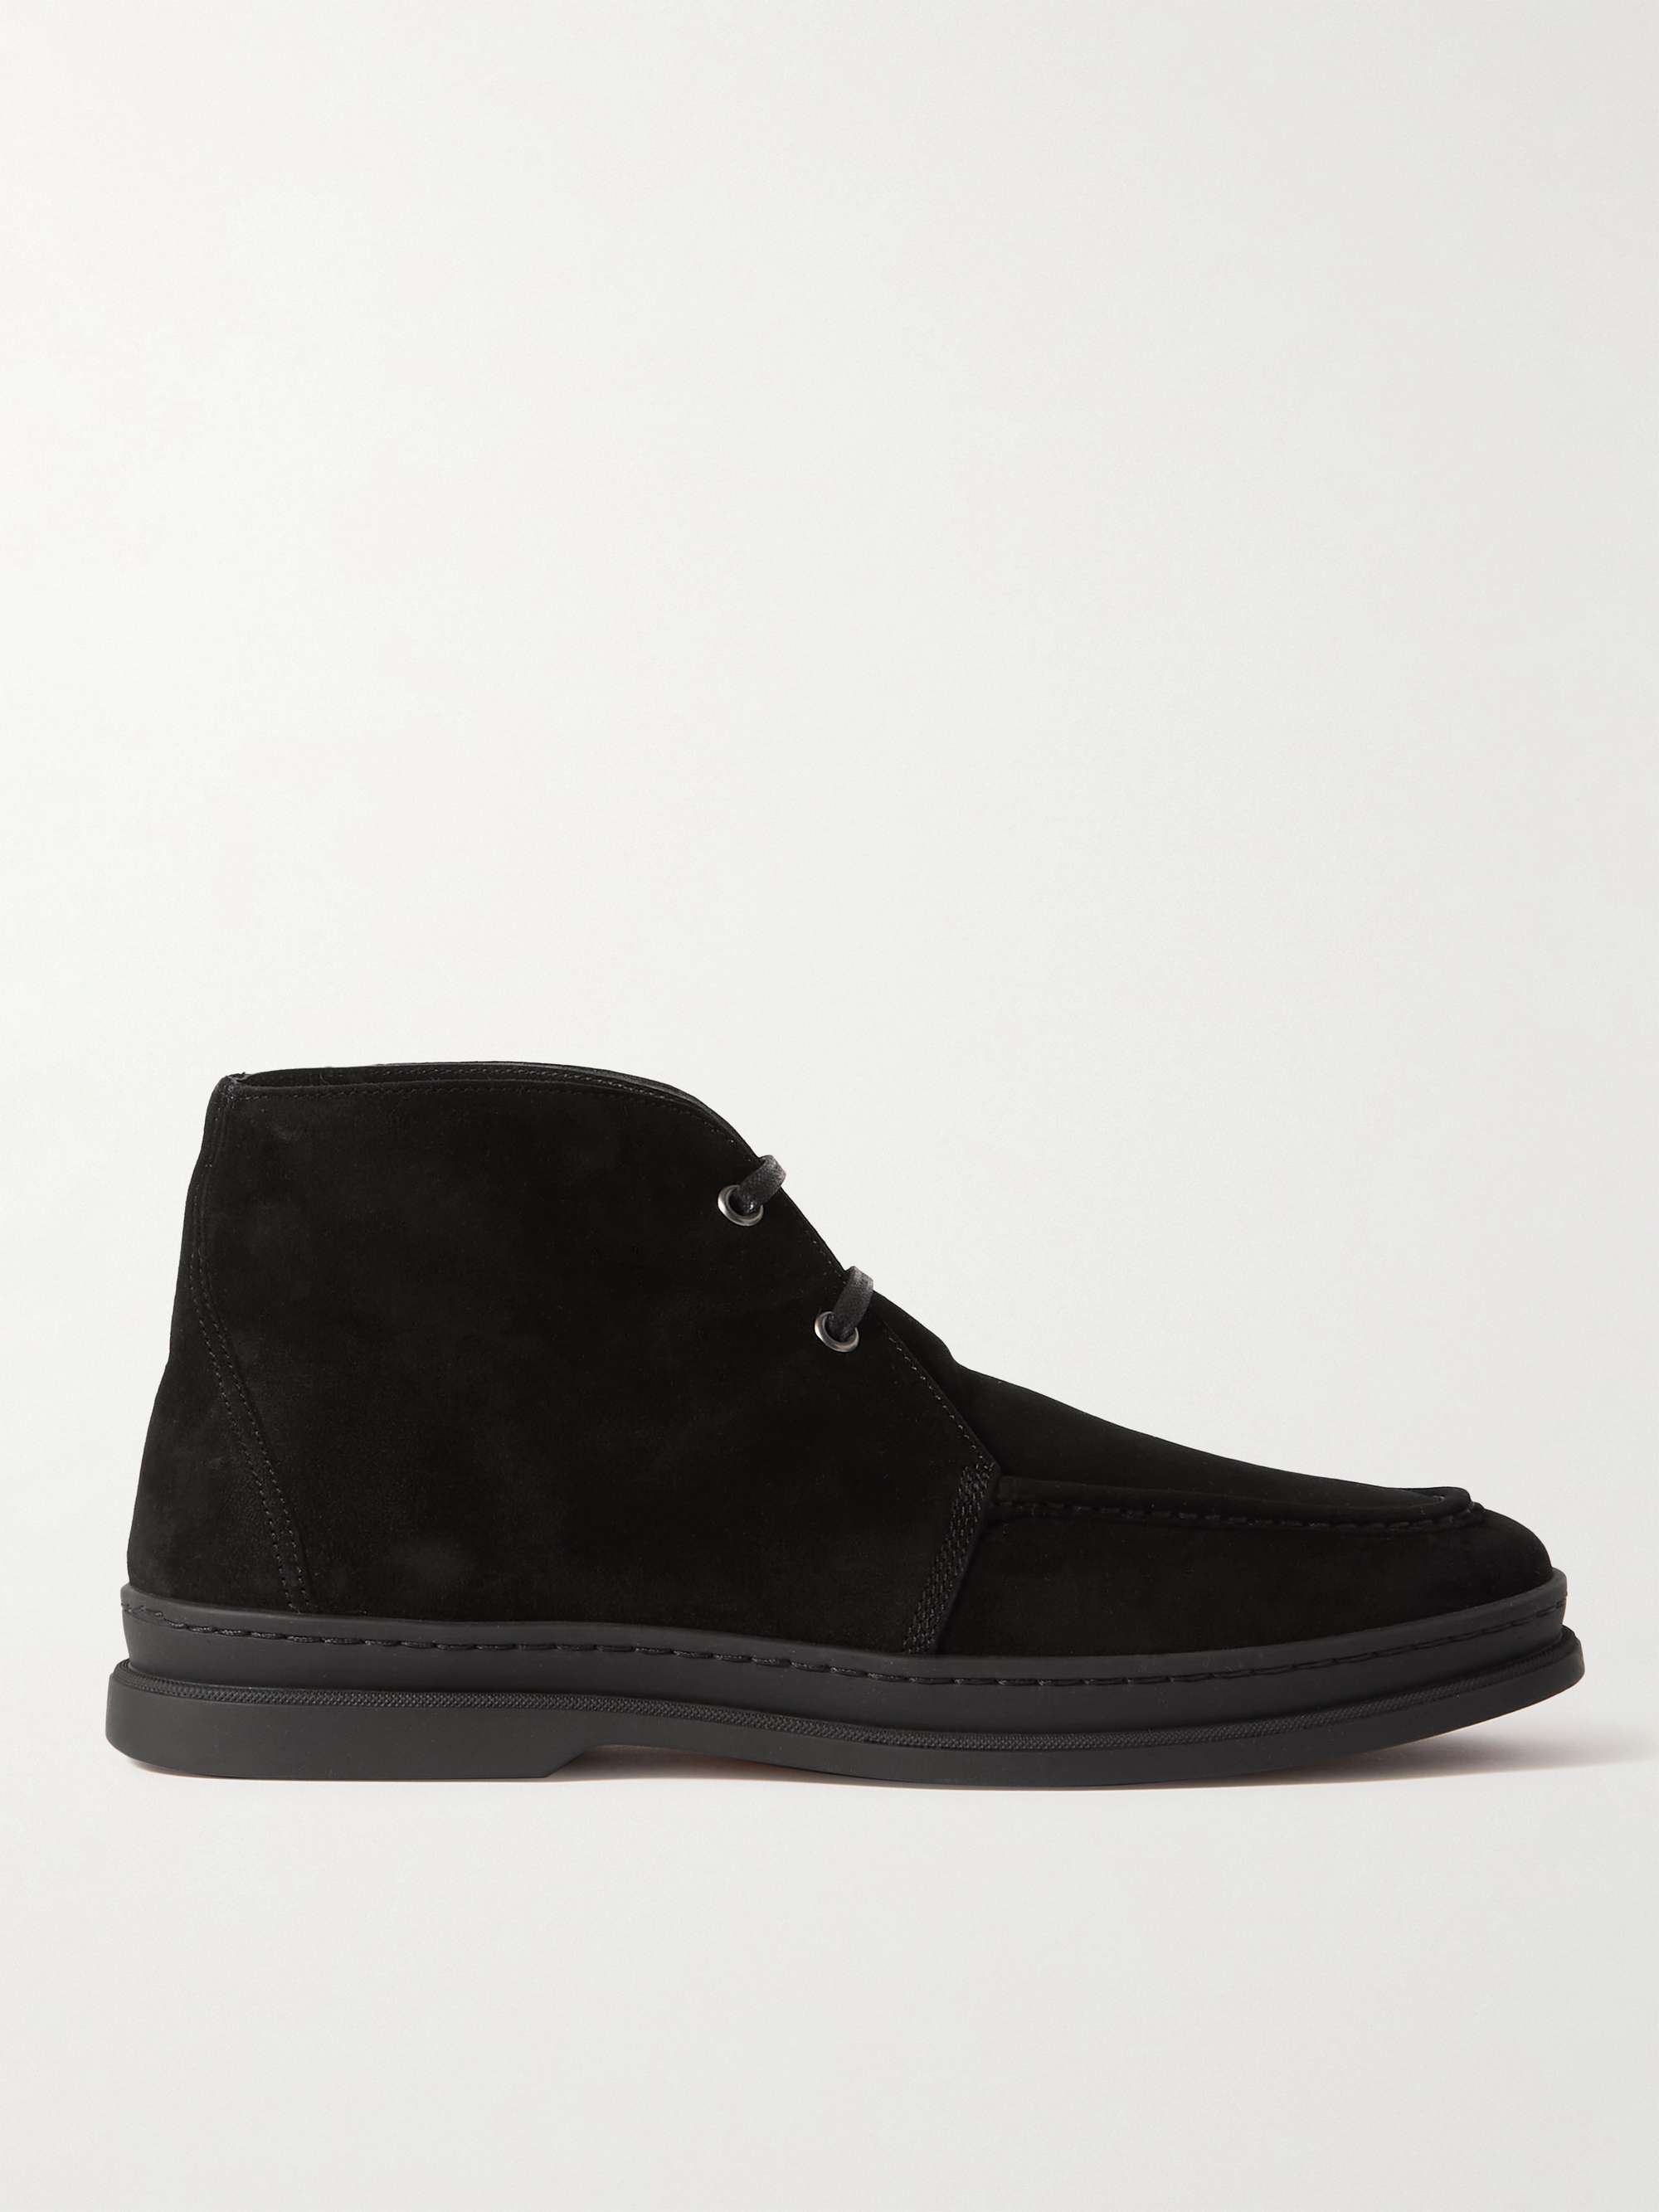 PAUL SMITH Paxton Suede Boots for Men | MR PORTER